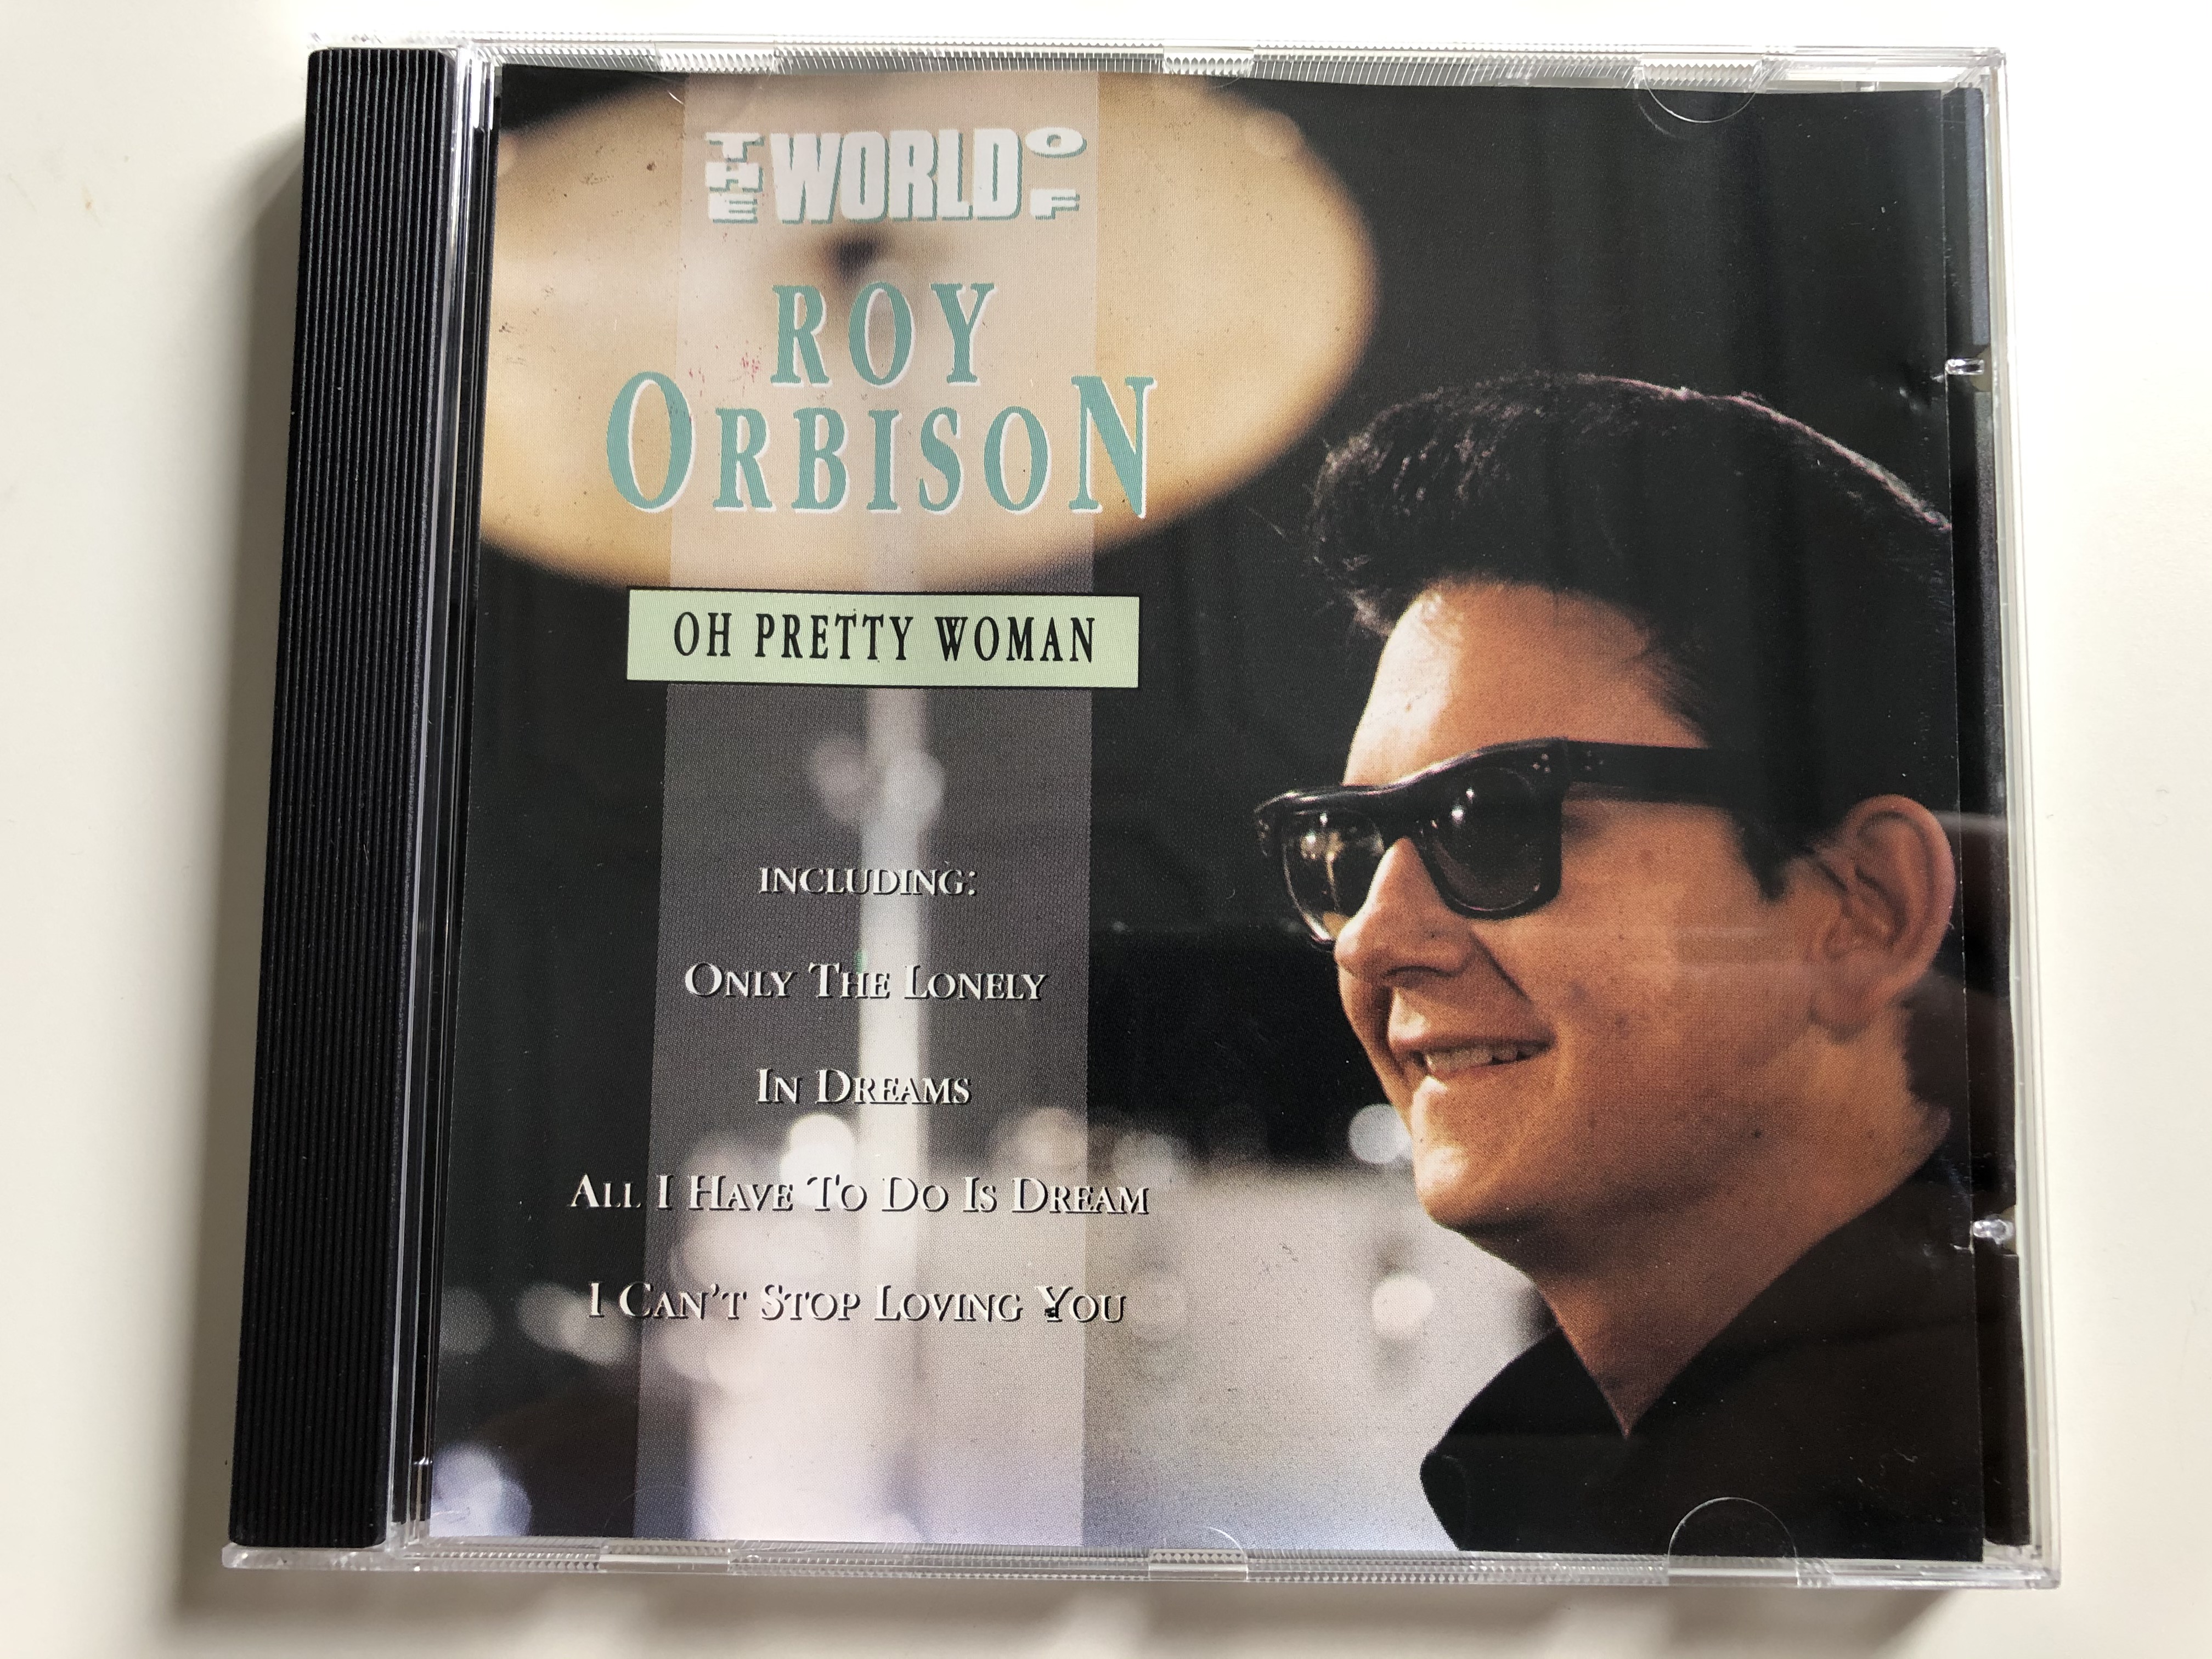 the-world-of-roy-orbison-oh-pretty-woman-including-only-the-lonely-in-dreams-all-i-have-to-do-is-dream-i-can-t-stop-loving-you-trace-trading-audio-cd-1992-0401252-1-.jpg